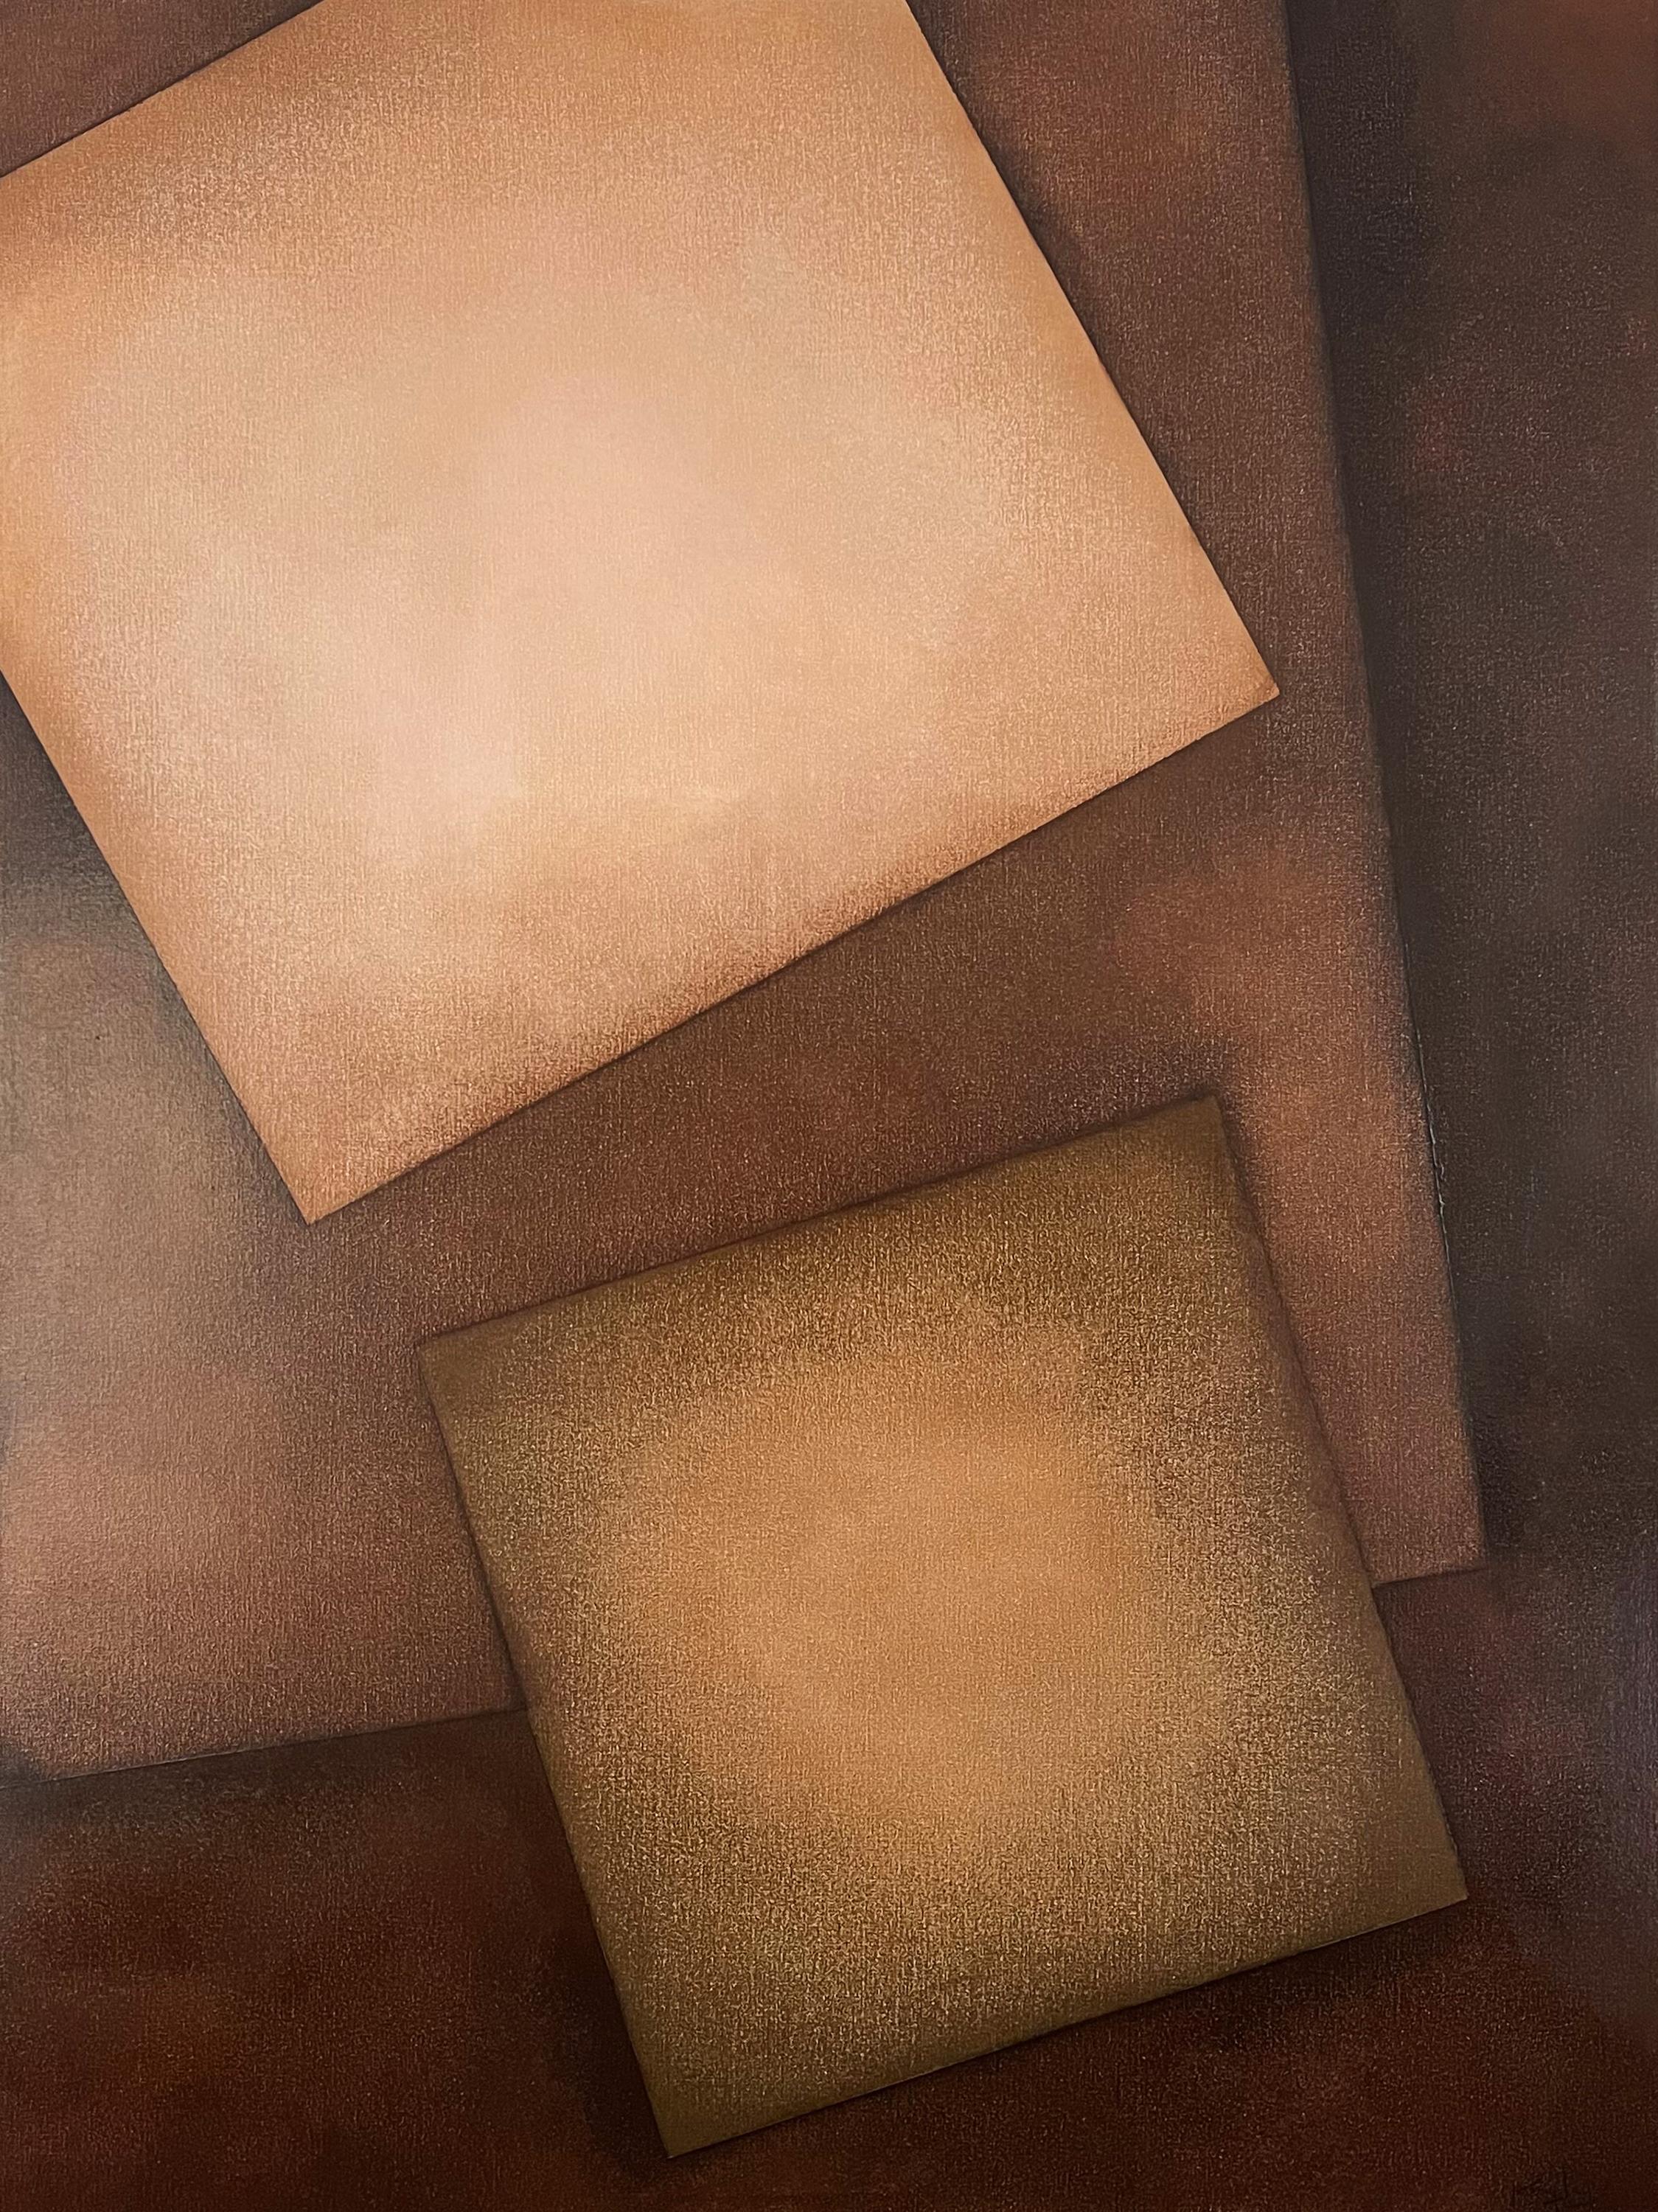 This painting is a geometric abstract painting featuring hues of brown.

Kerry Hays is inspired by the work of Josef Albers, Helen Frankenthaler, Agnes Martin and Barbara Hepworth.

Kerry Hays is an Atlanta-based abstract painter. Her recent body of